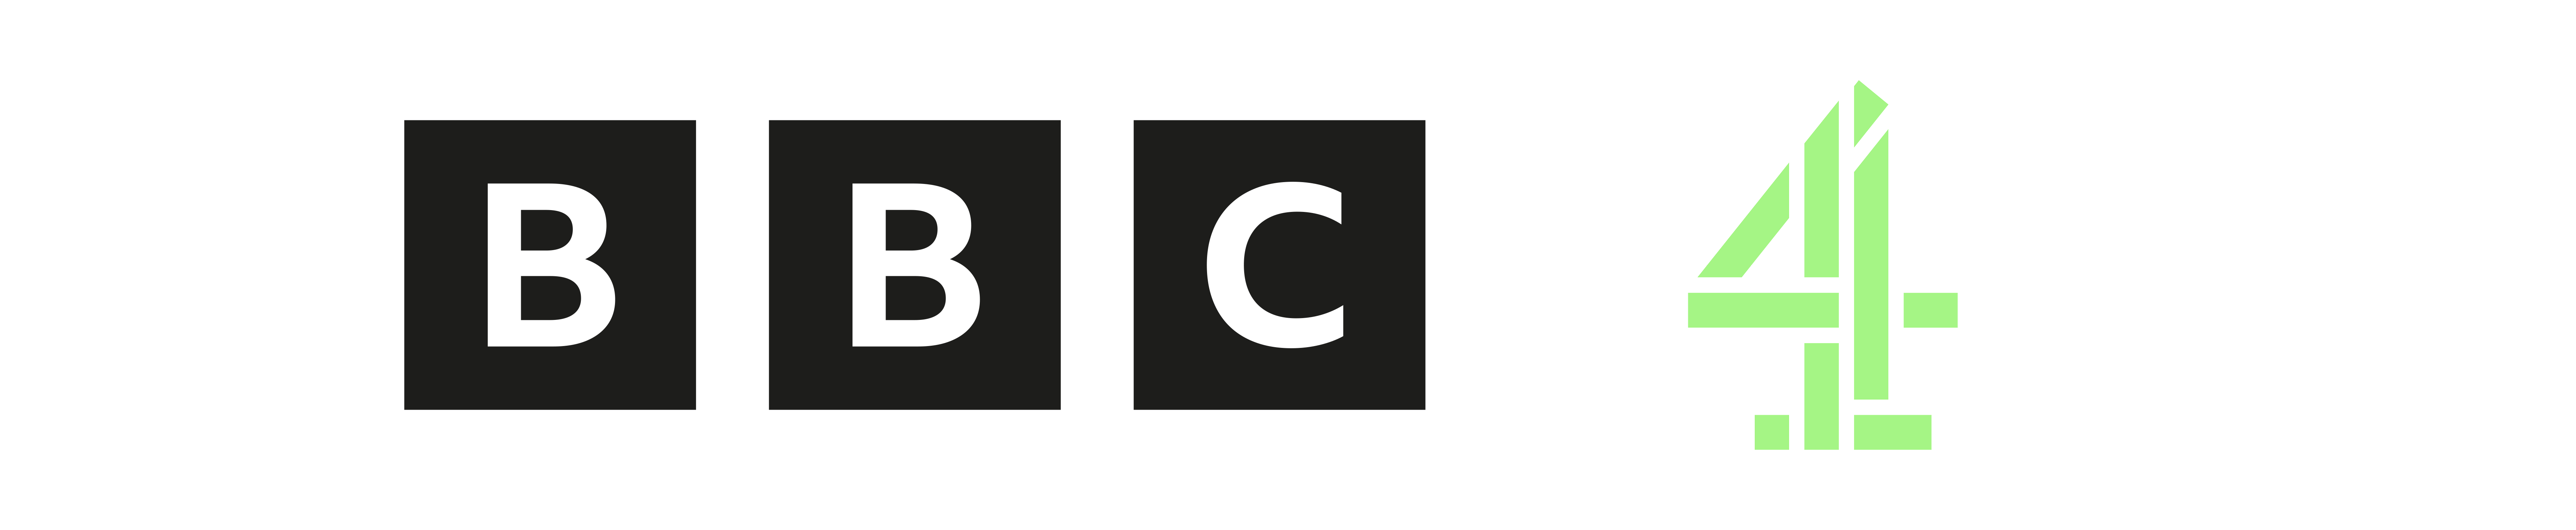 BBC logo and Channel 4 logo